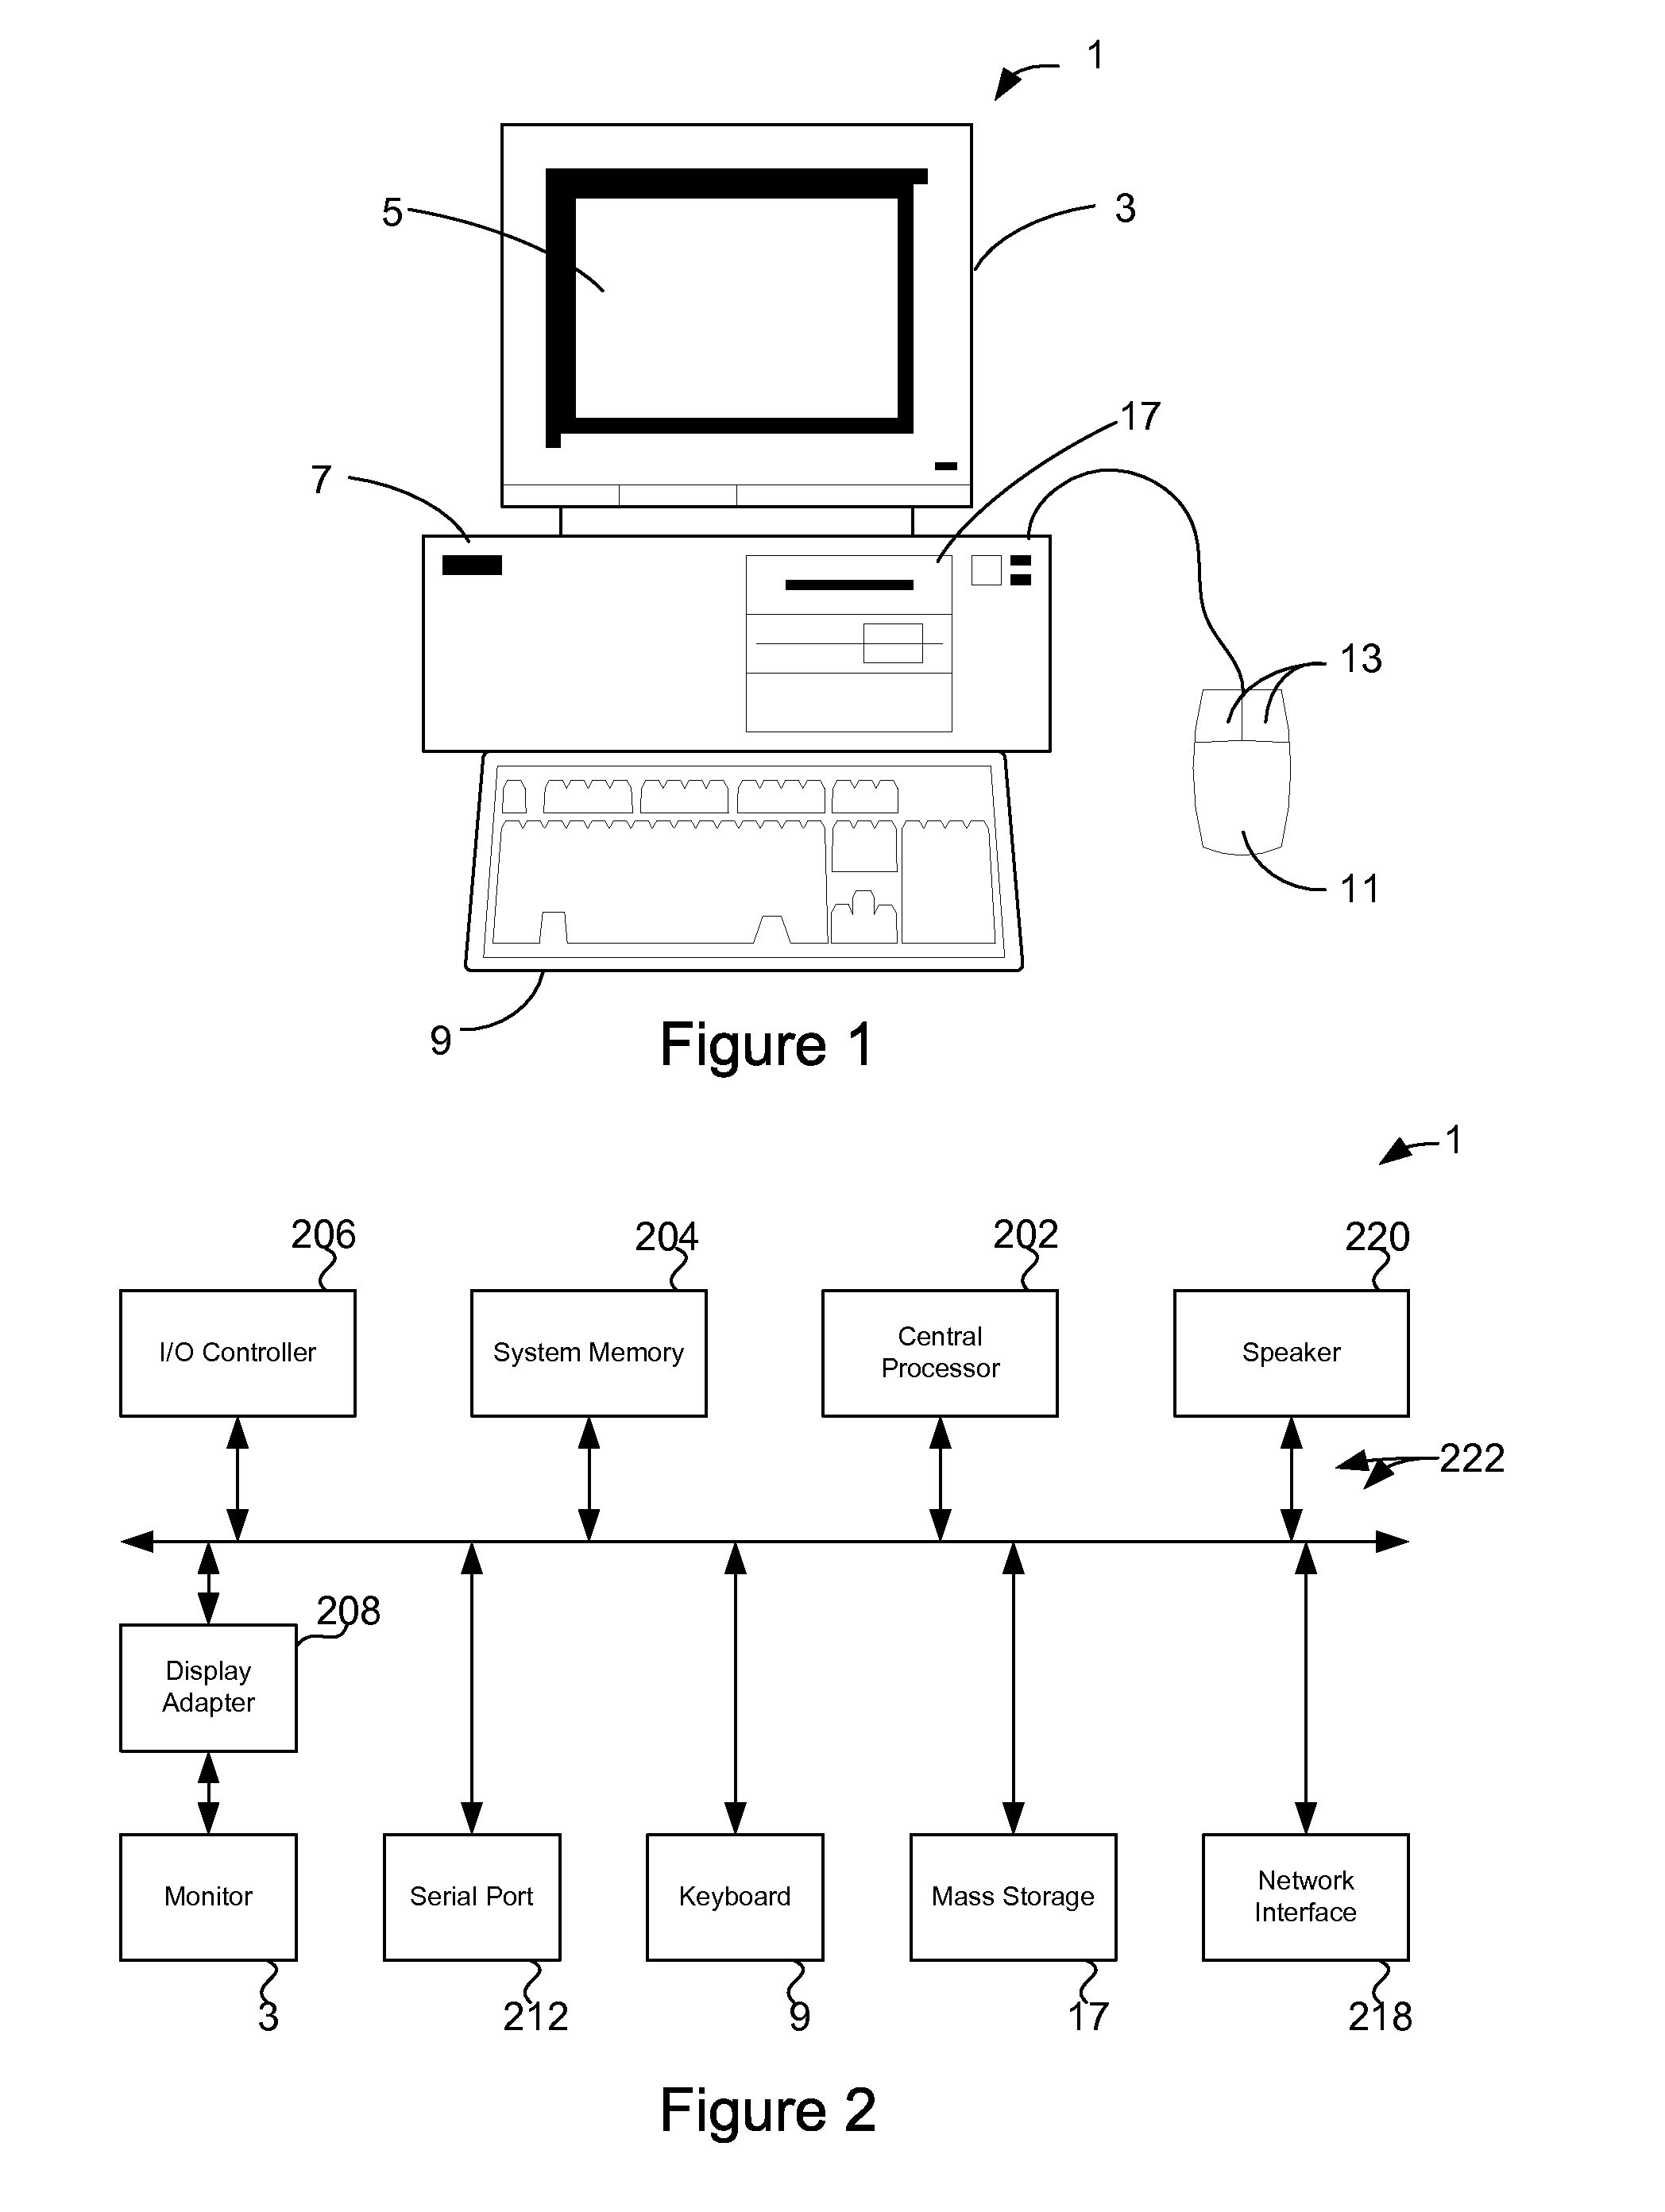 Method of automatic shape-based routing of interconnects in spines for integrated circuit design